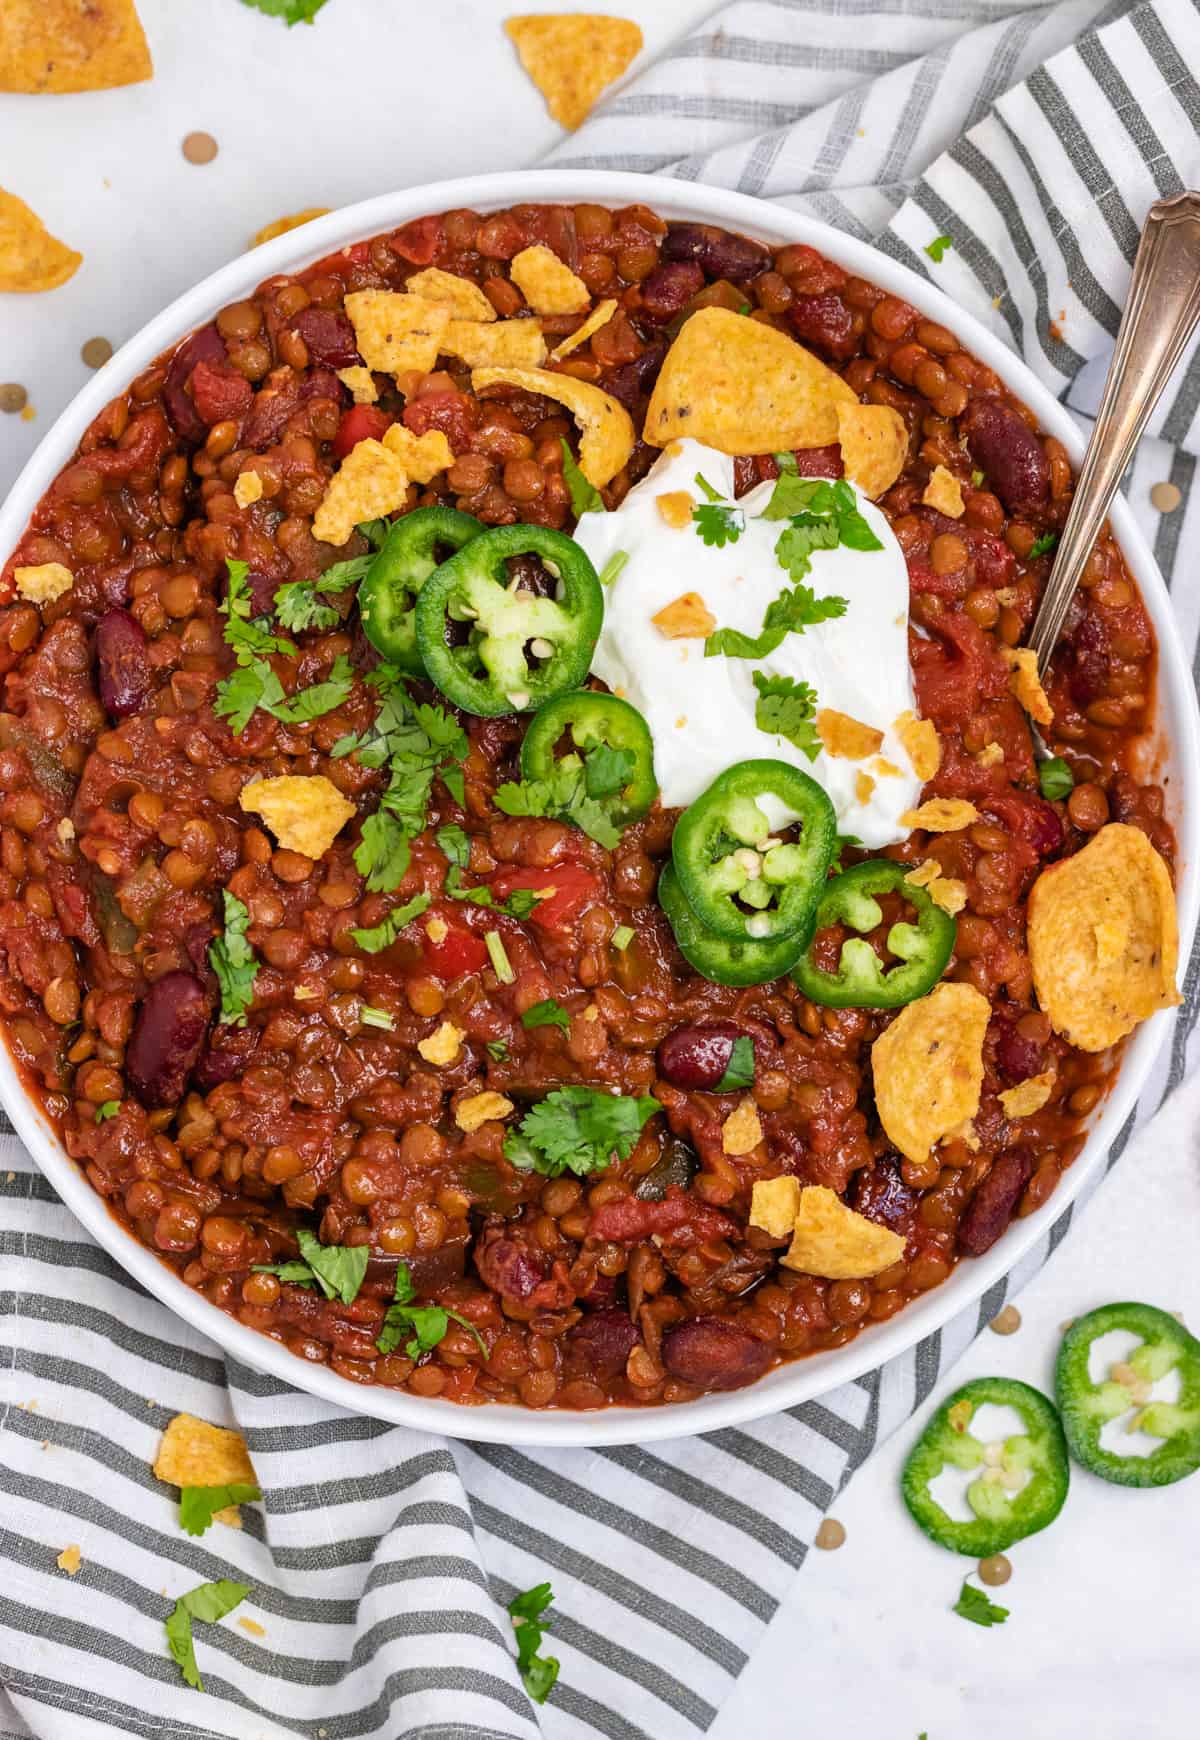 Overhead view of crock pot lentil chili in white bowl.